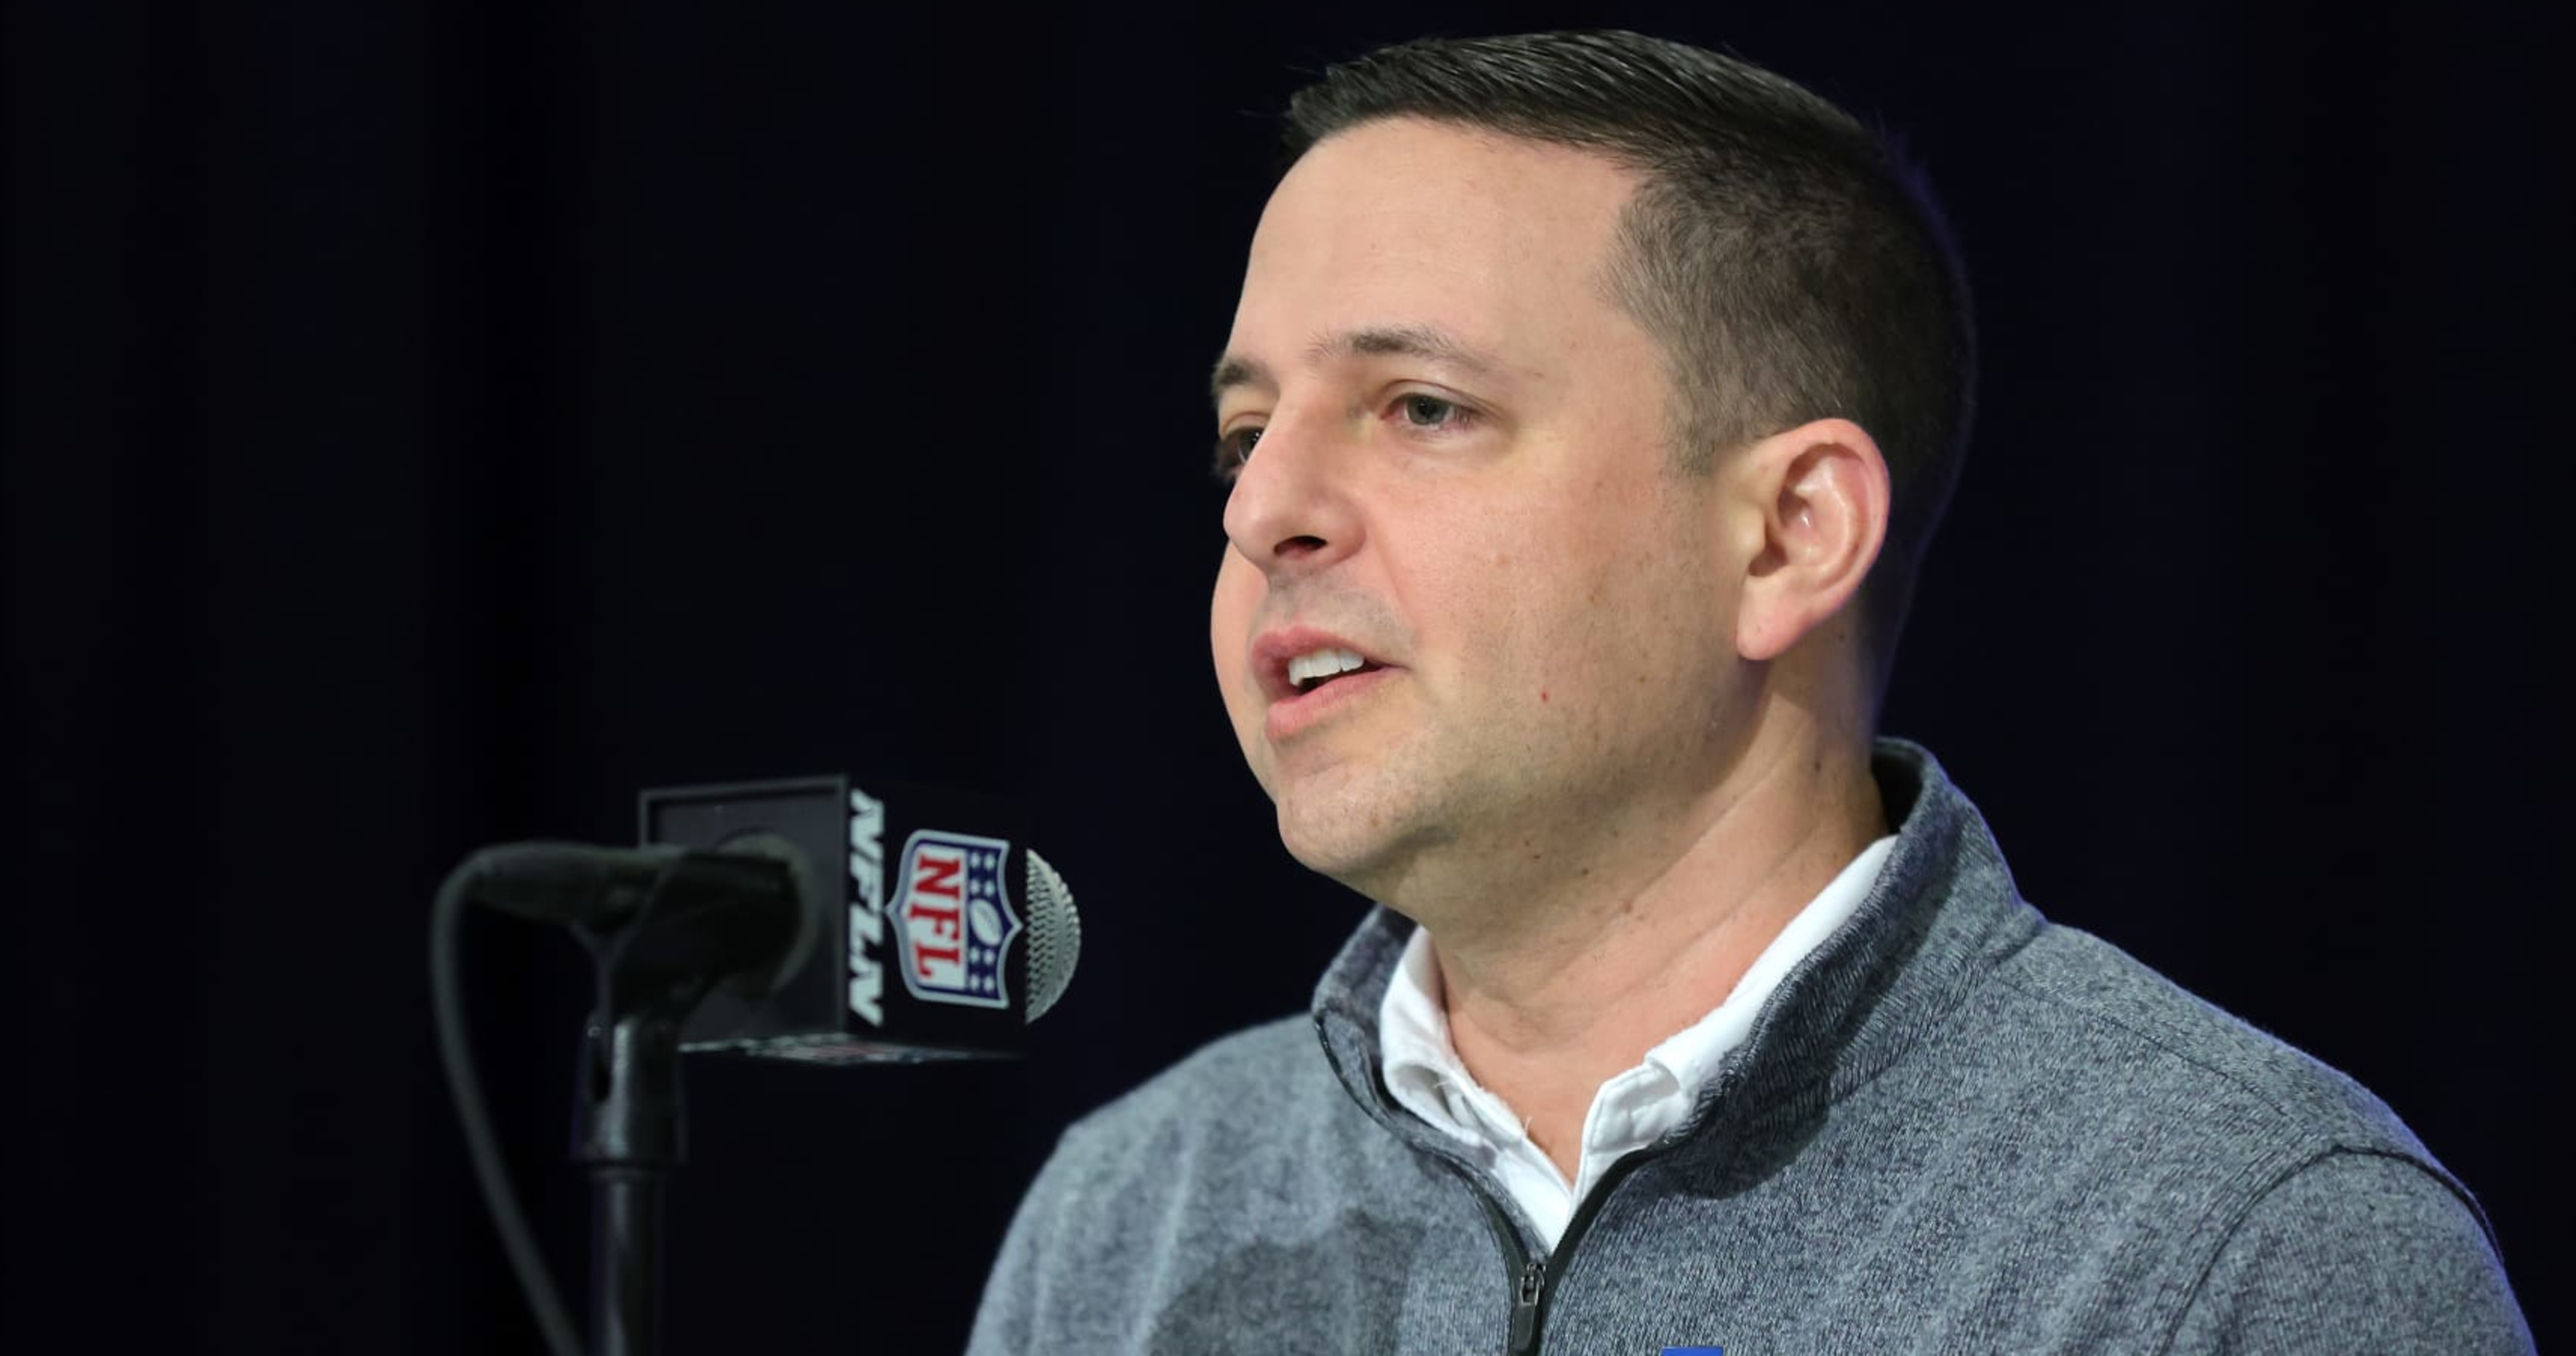 Patriots Rumors: Eliot Wolf 'Very Likely' to Get GM Role amid Eagles' Hunt Interview